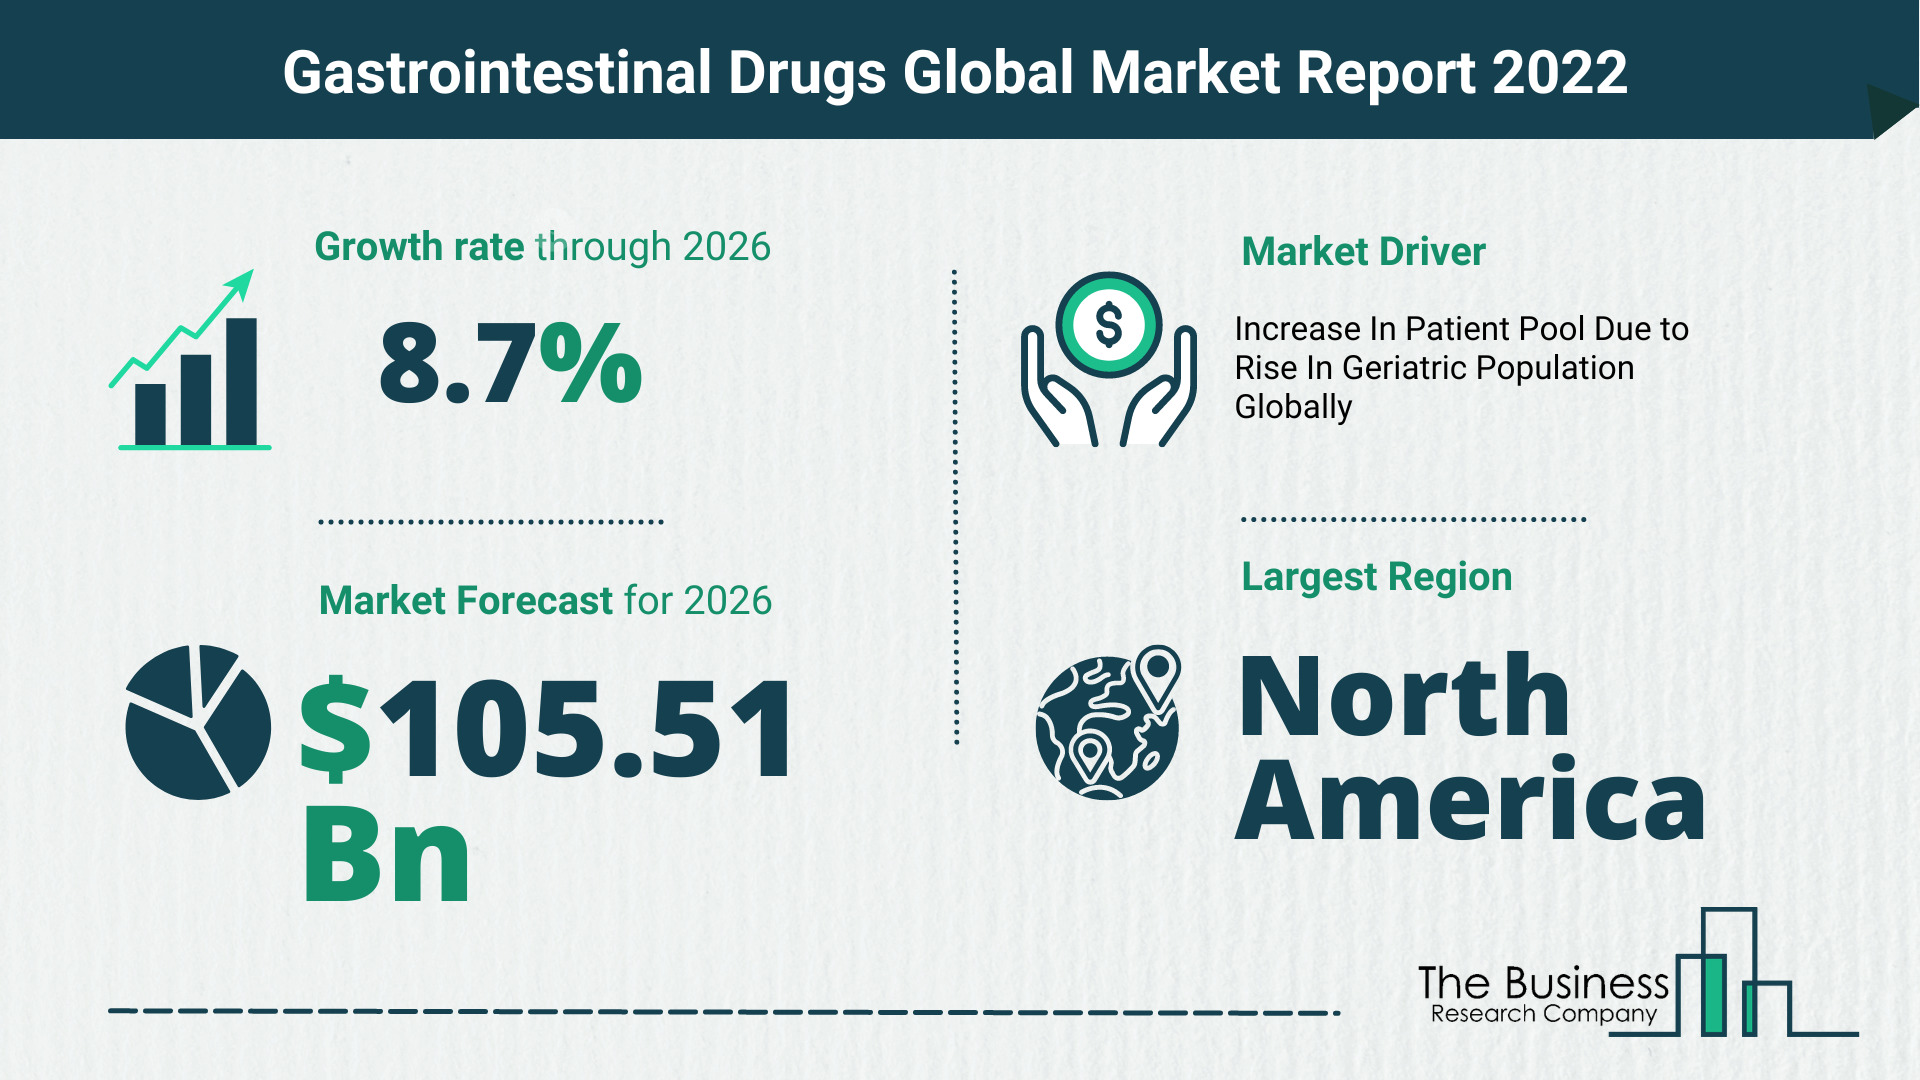 How Will The Gastrointestinal Drugs Market Grow In 2022?